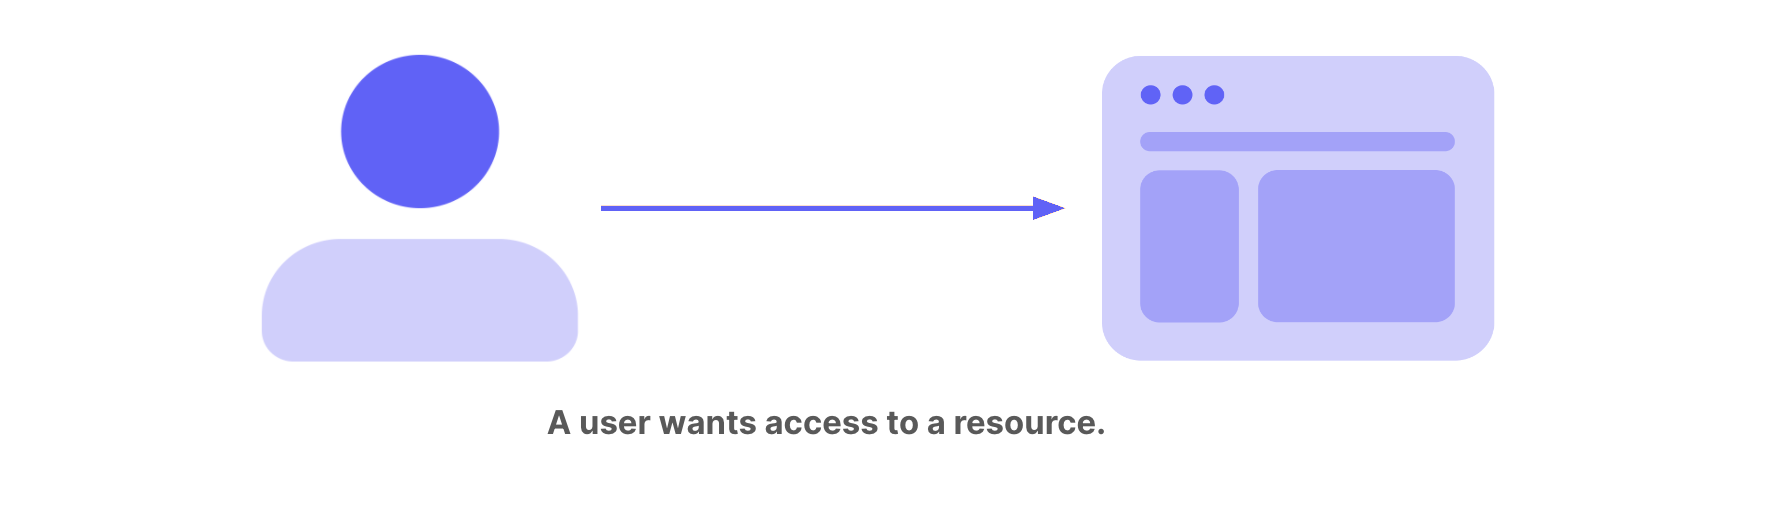 Simple diagram showing user accessing resource